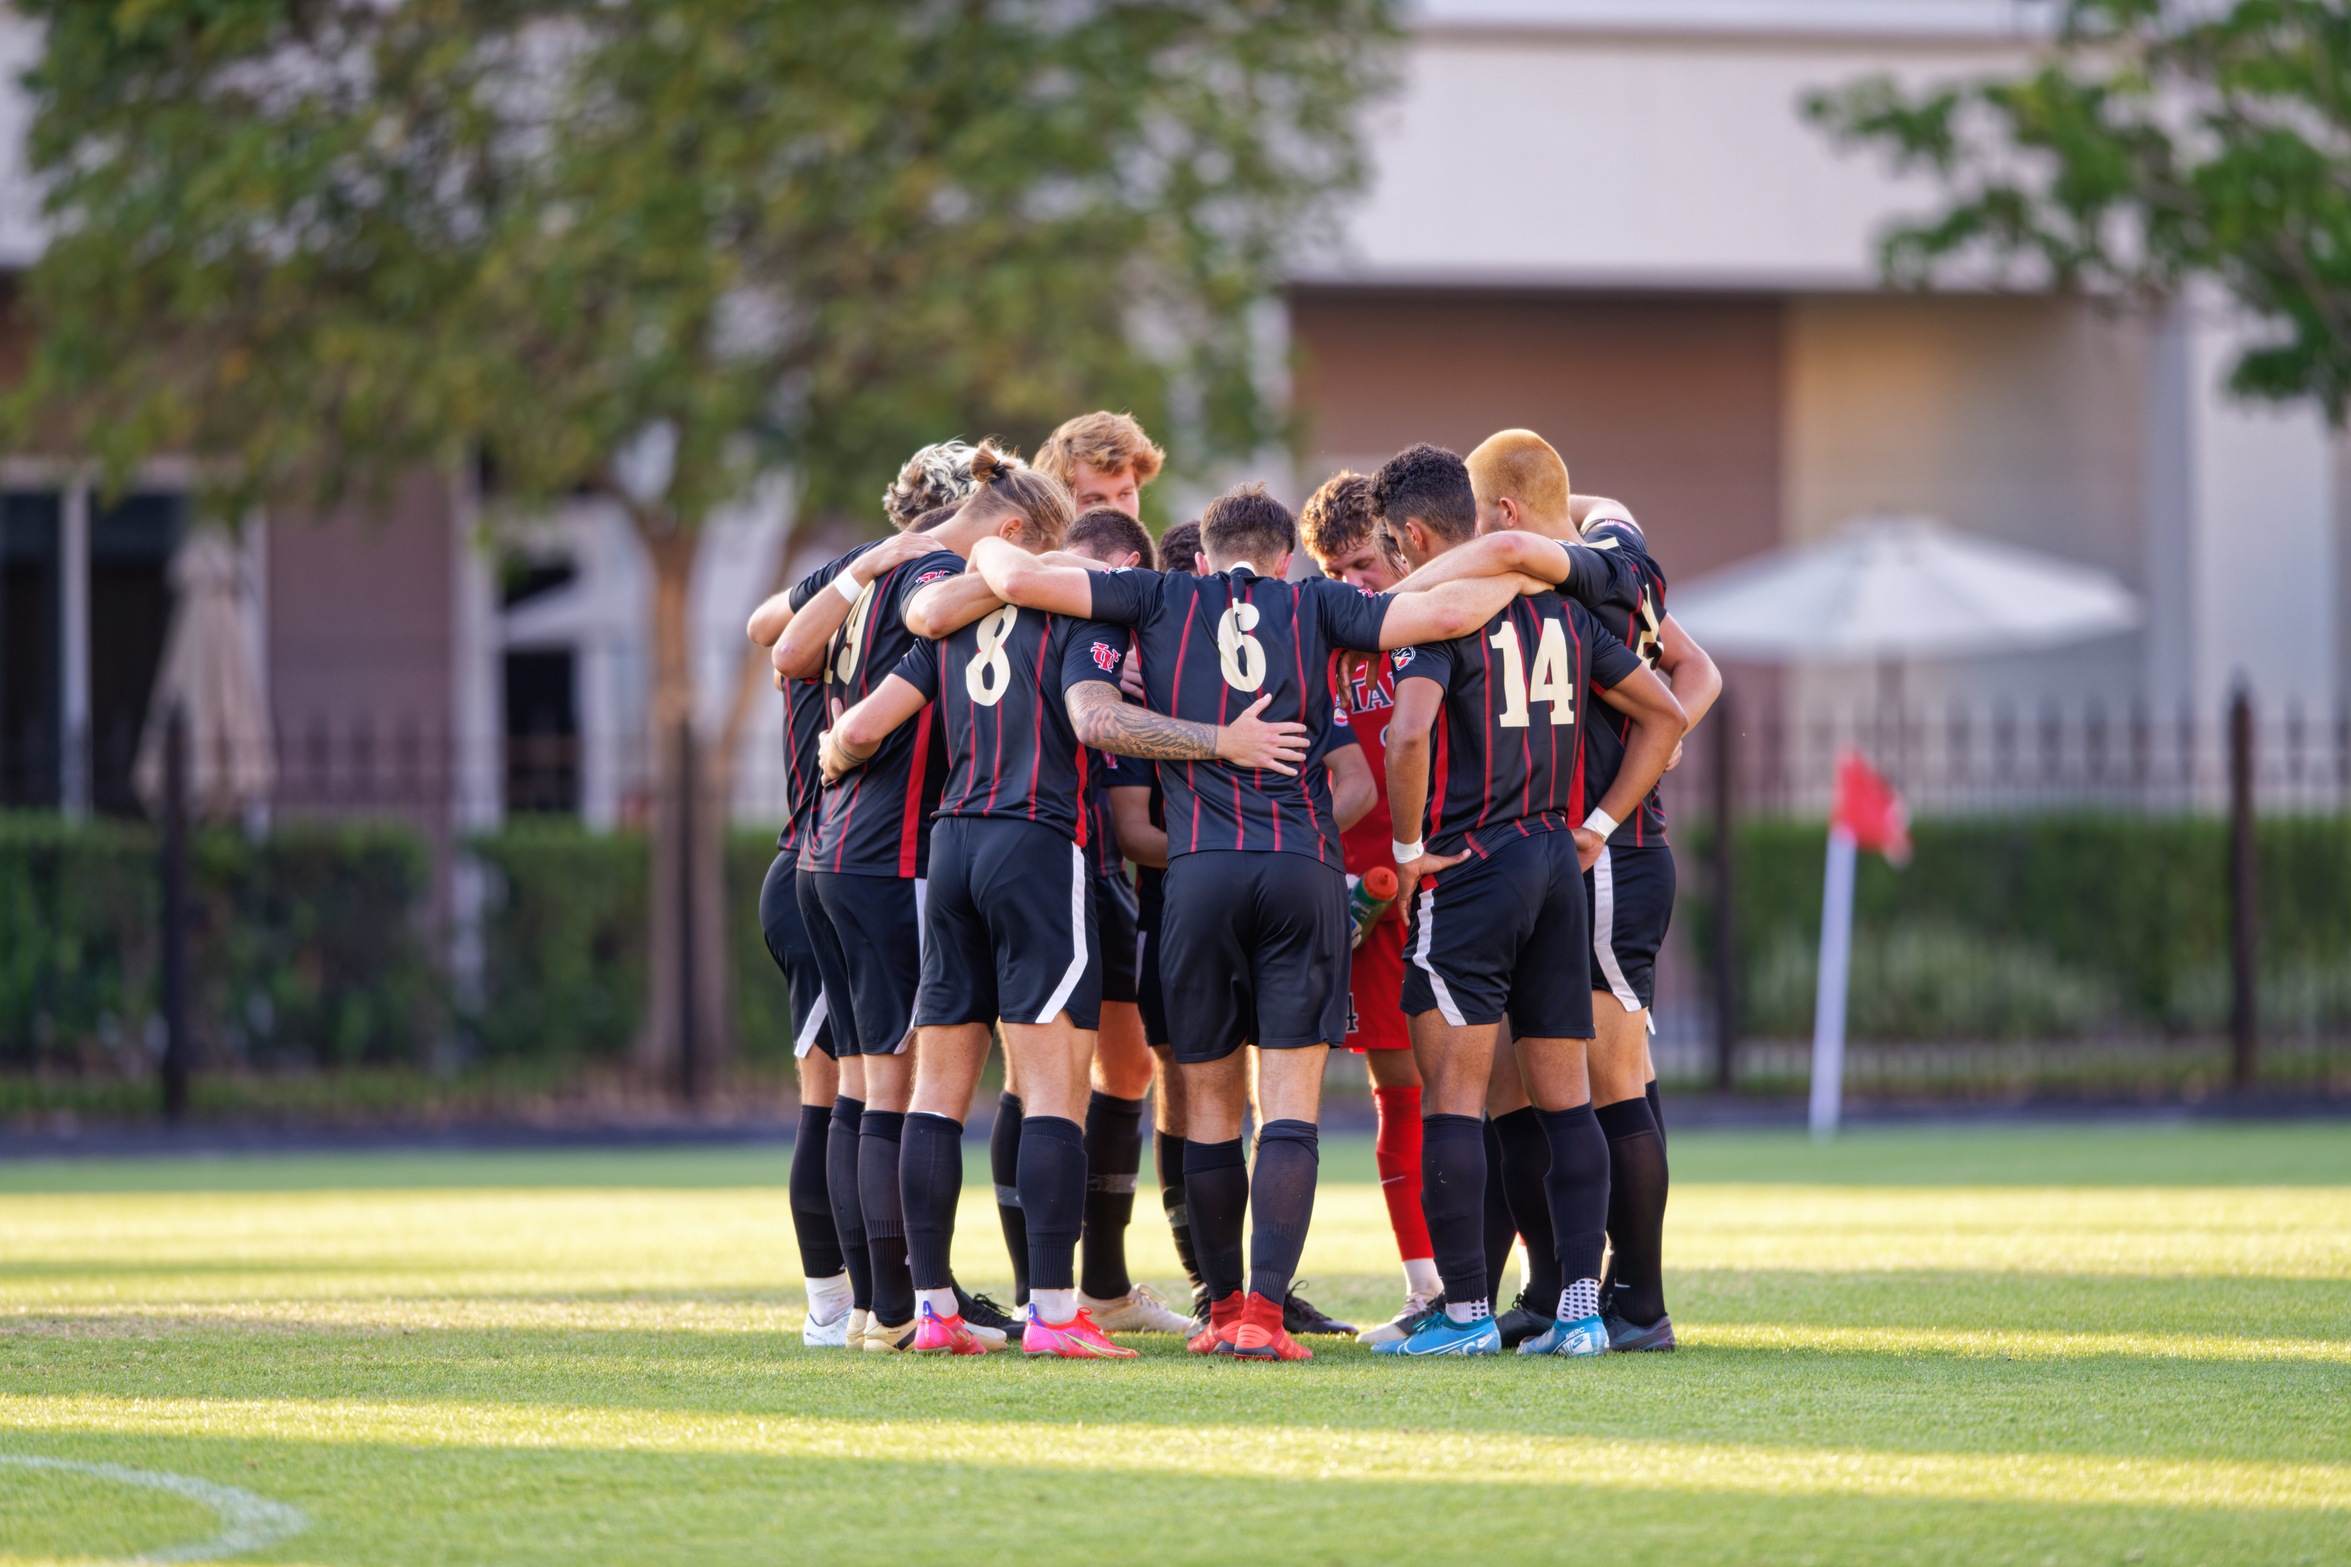 The University of Tampa Spartans men's soccer team.